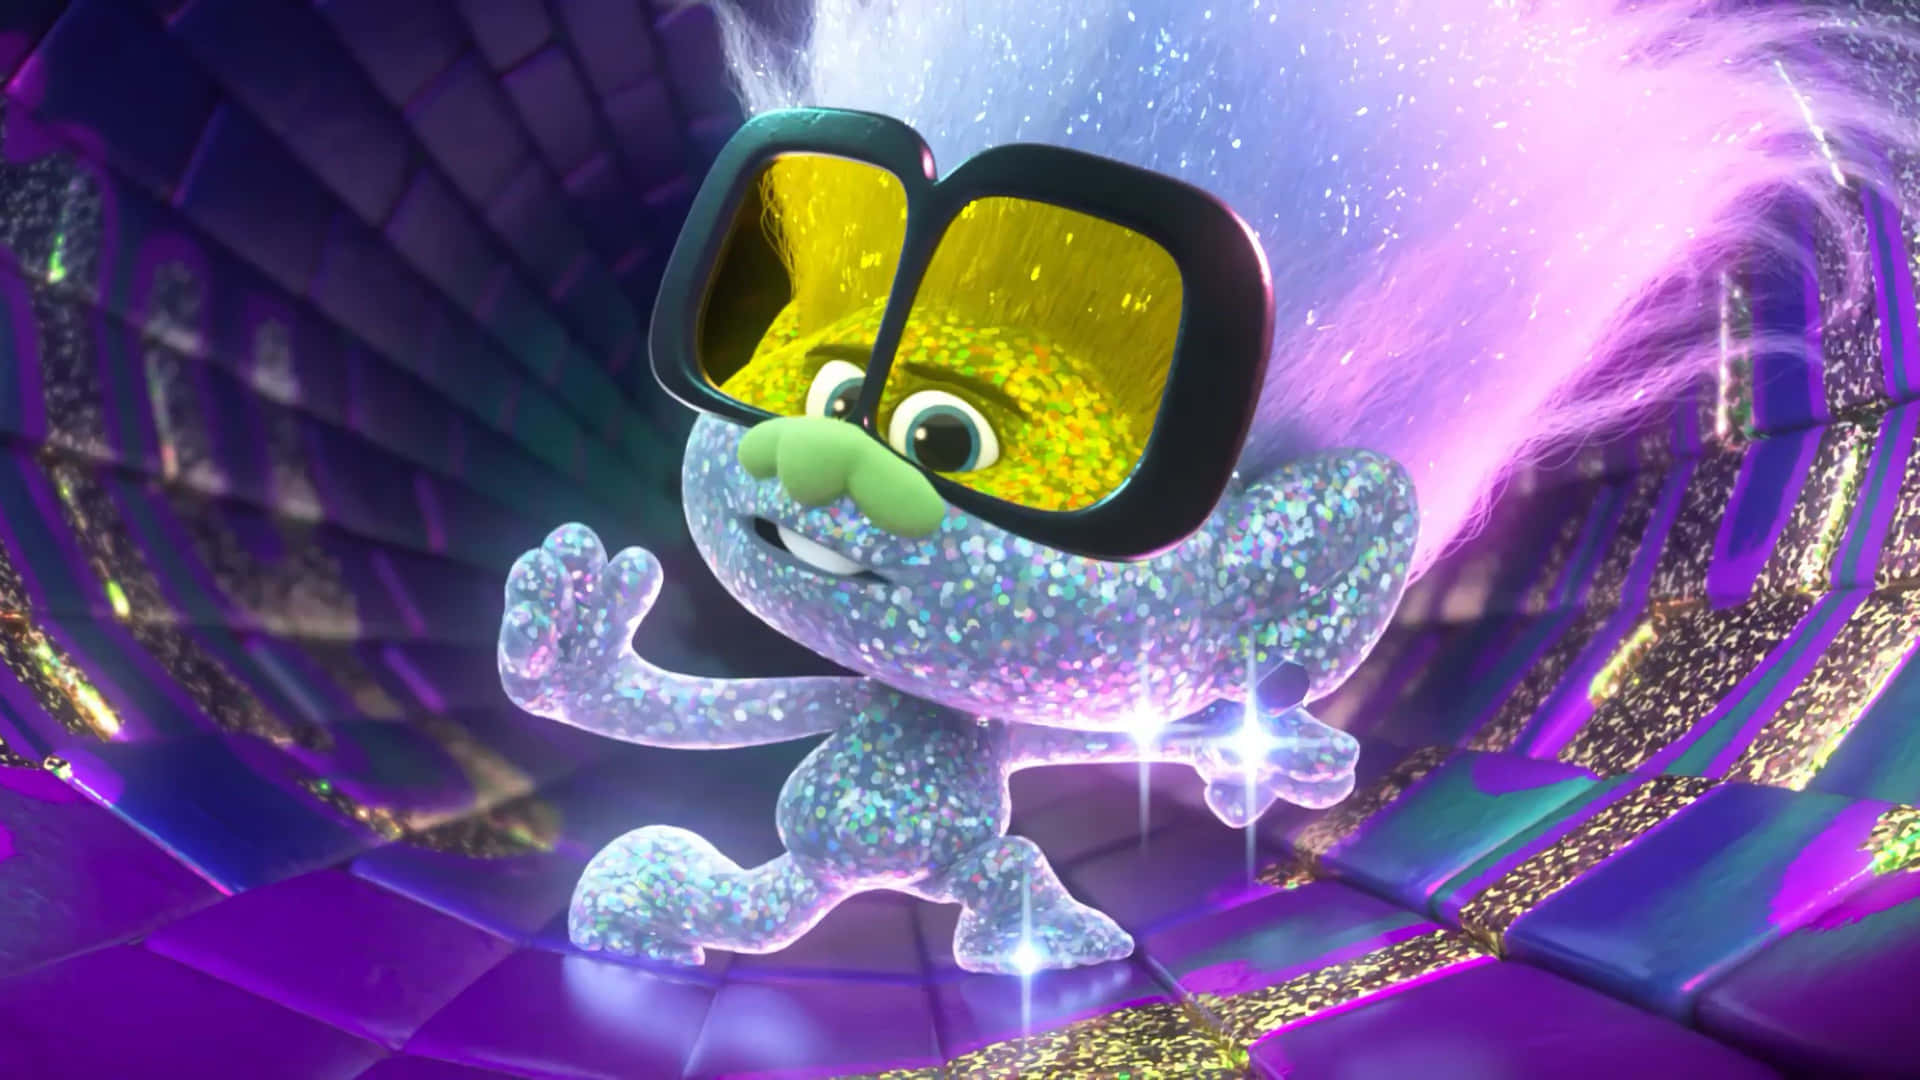 A Cartoon Character Wearing Sunglasses In A Purple And Purple Space